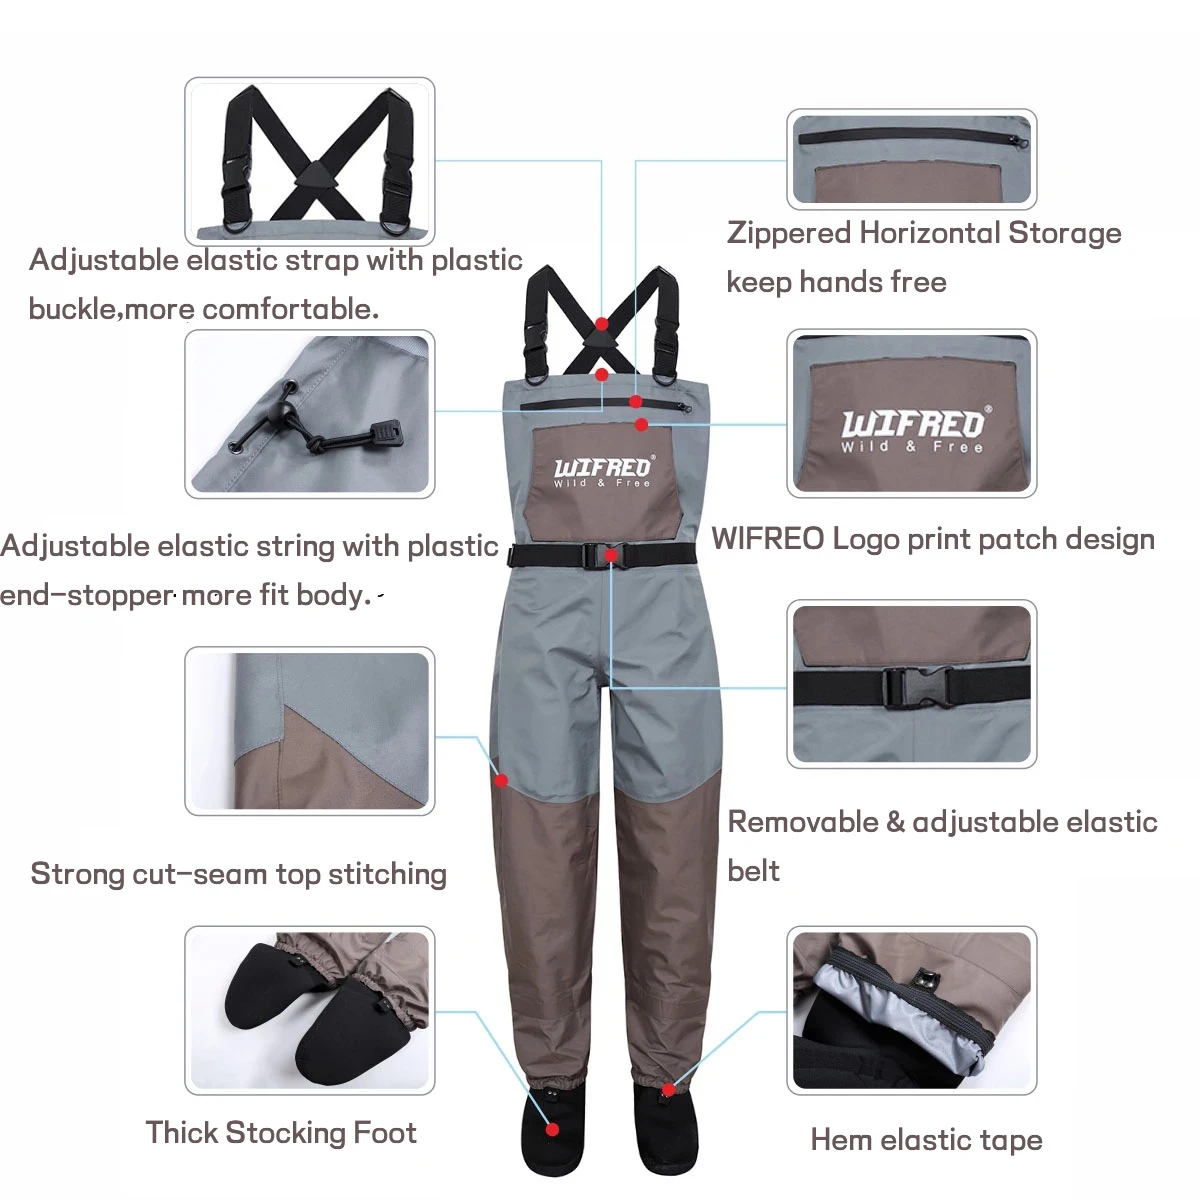 https://ae01.alicdn.com/kf/H00e2b22e390d45e69e0749adb9a7c72bG/WIFREO-Fly-Fishing-Wader-Wading-Pants-Portable-Chest-Overalls-3-Ply-Breathable-Waterproof-Clothes-Wading-Pants.jpg